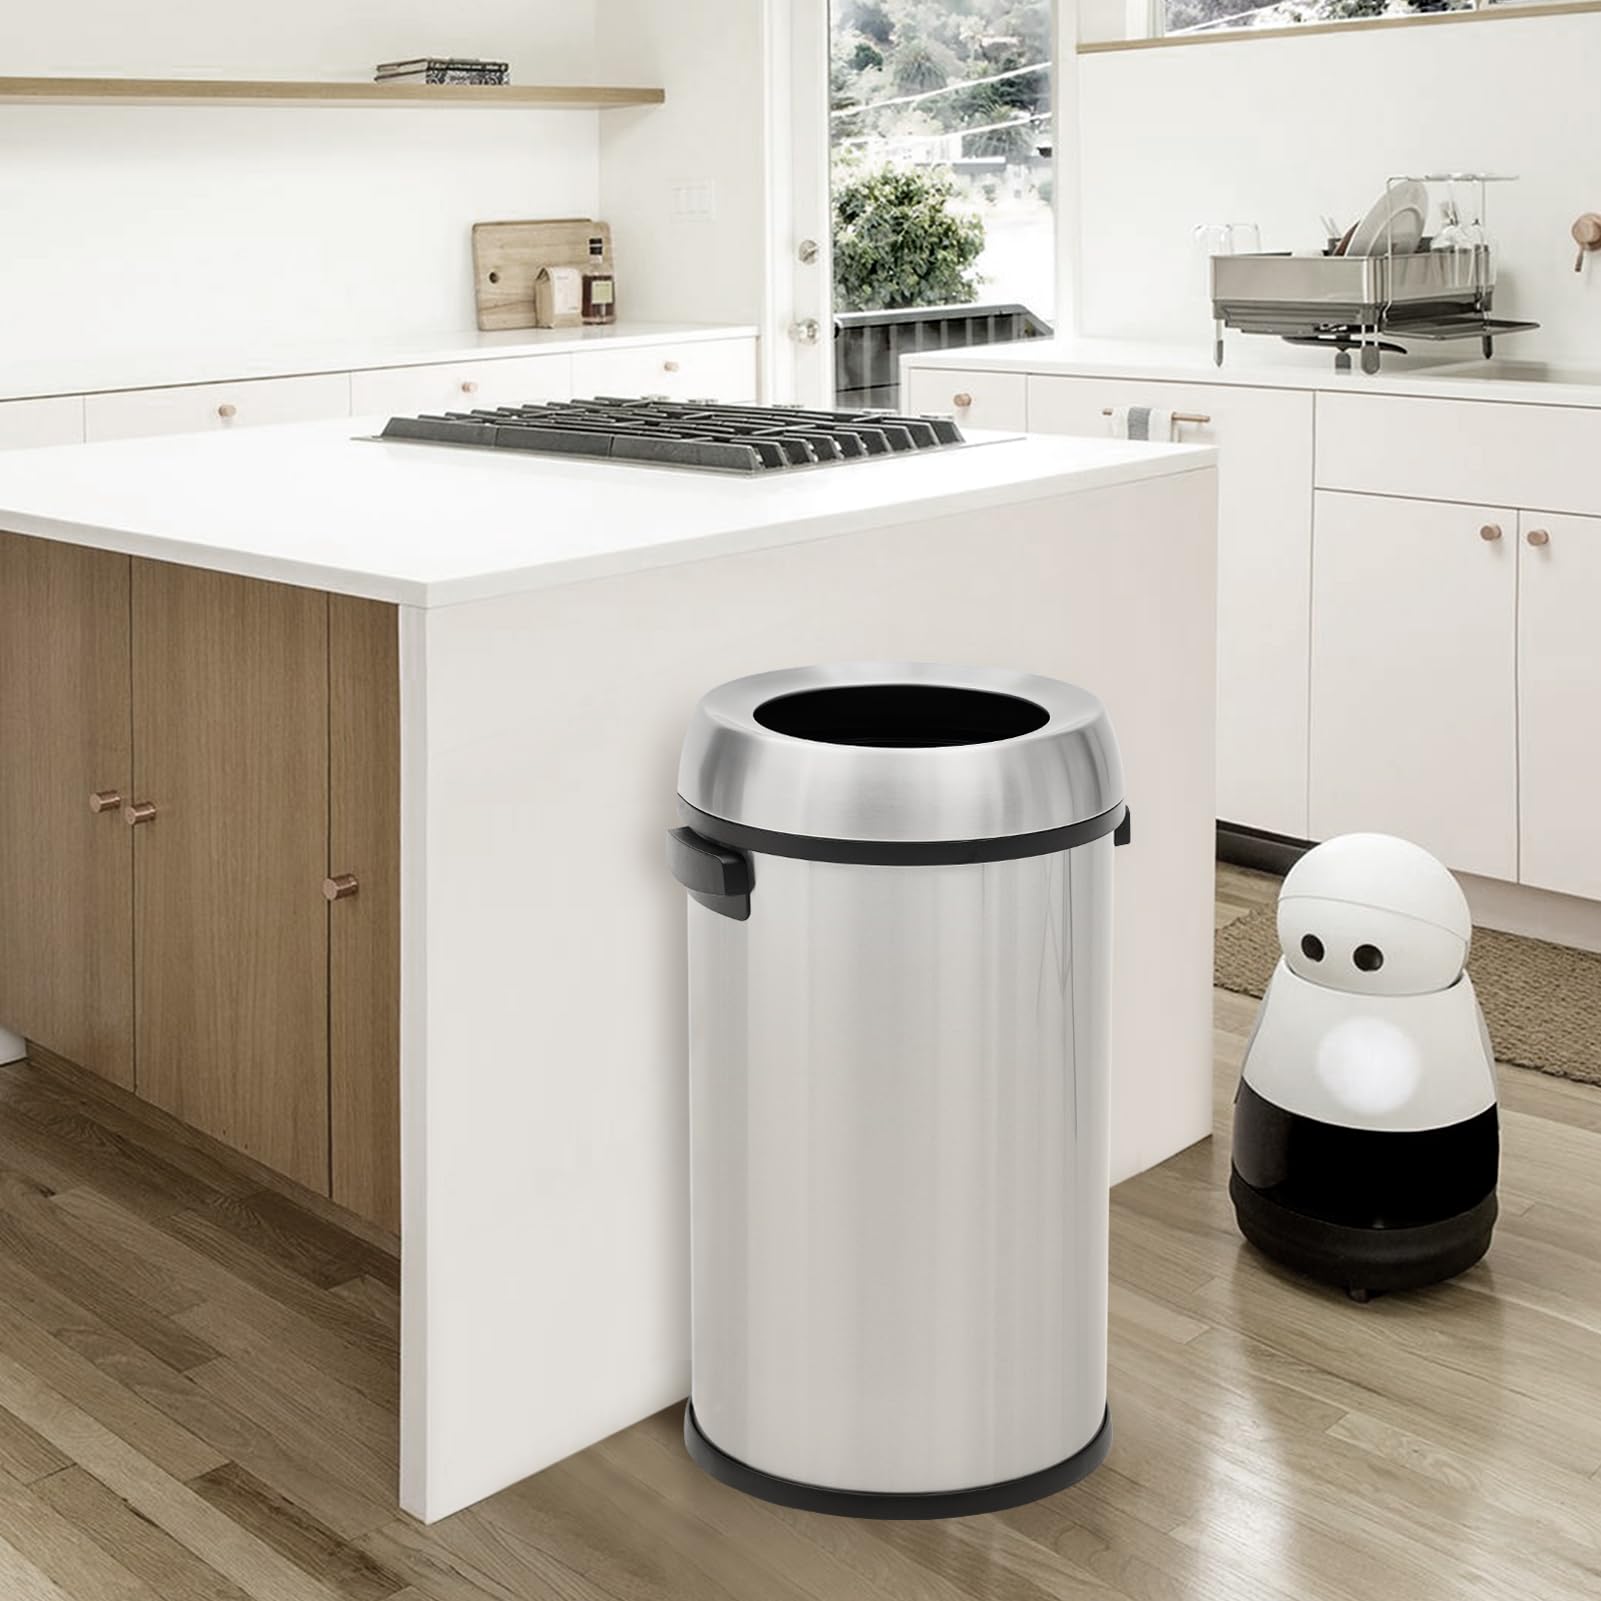 GlowSol 17 Gallon Large Capacity Kitchen Trash Can, Commercial Open Trash Can, Heavy Duty Brushed Stainless Steel Garbage Can, 65 Liter, Suitable for Kitchen Outdoor Office